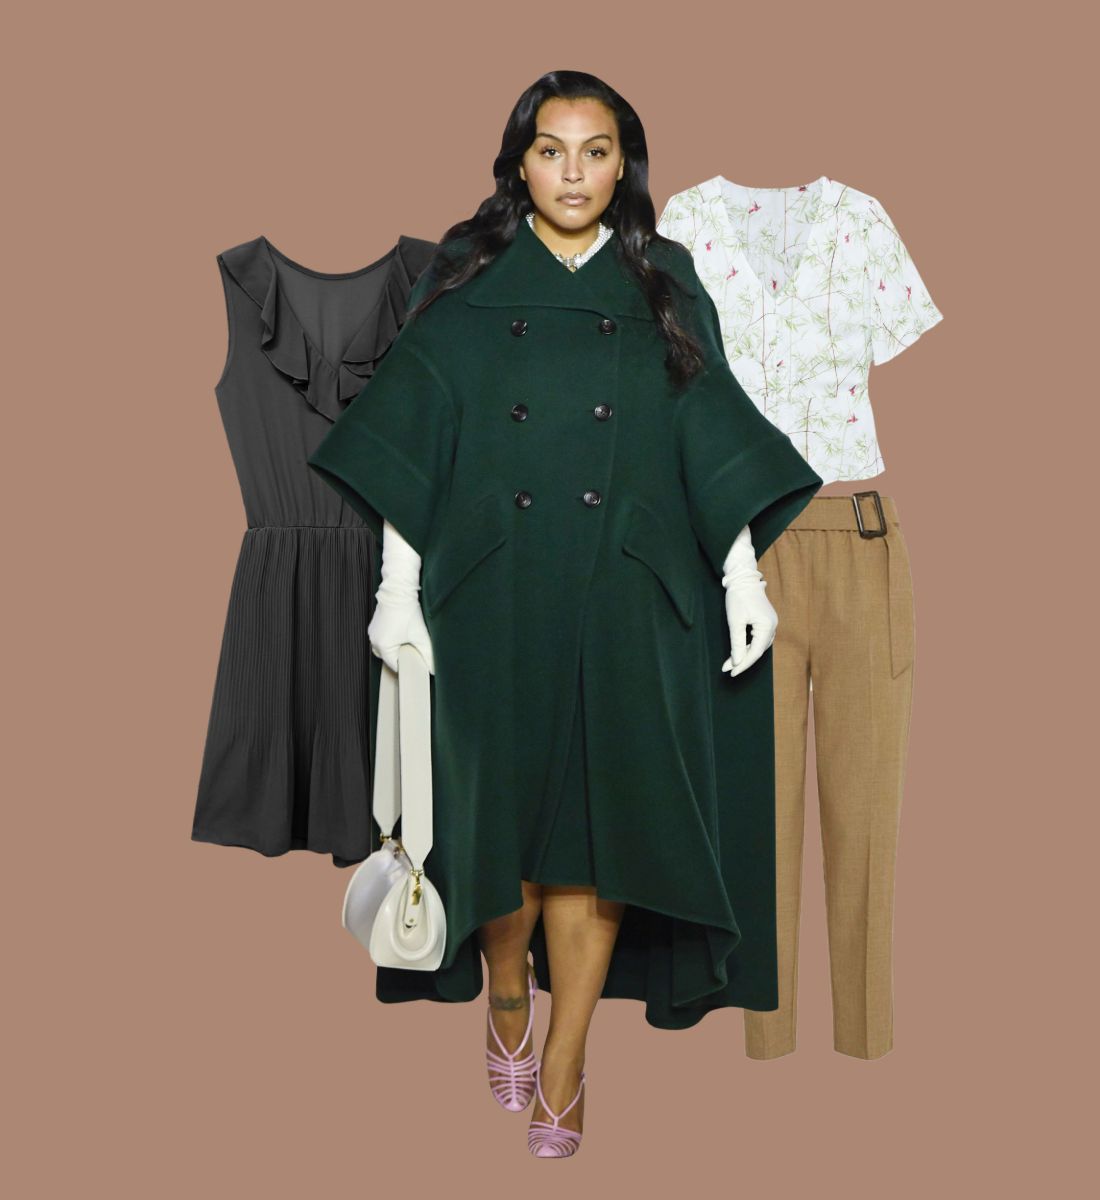 How to dress if you are curvy - Lookiero Blog